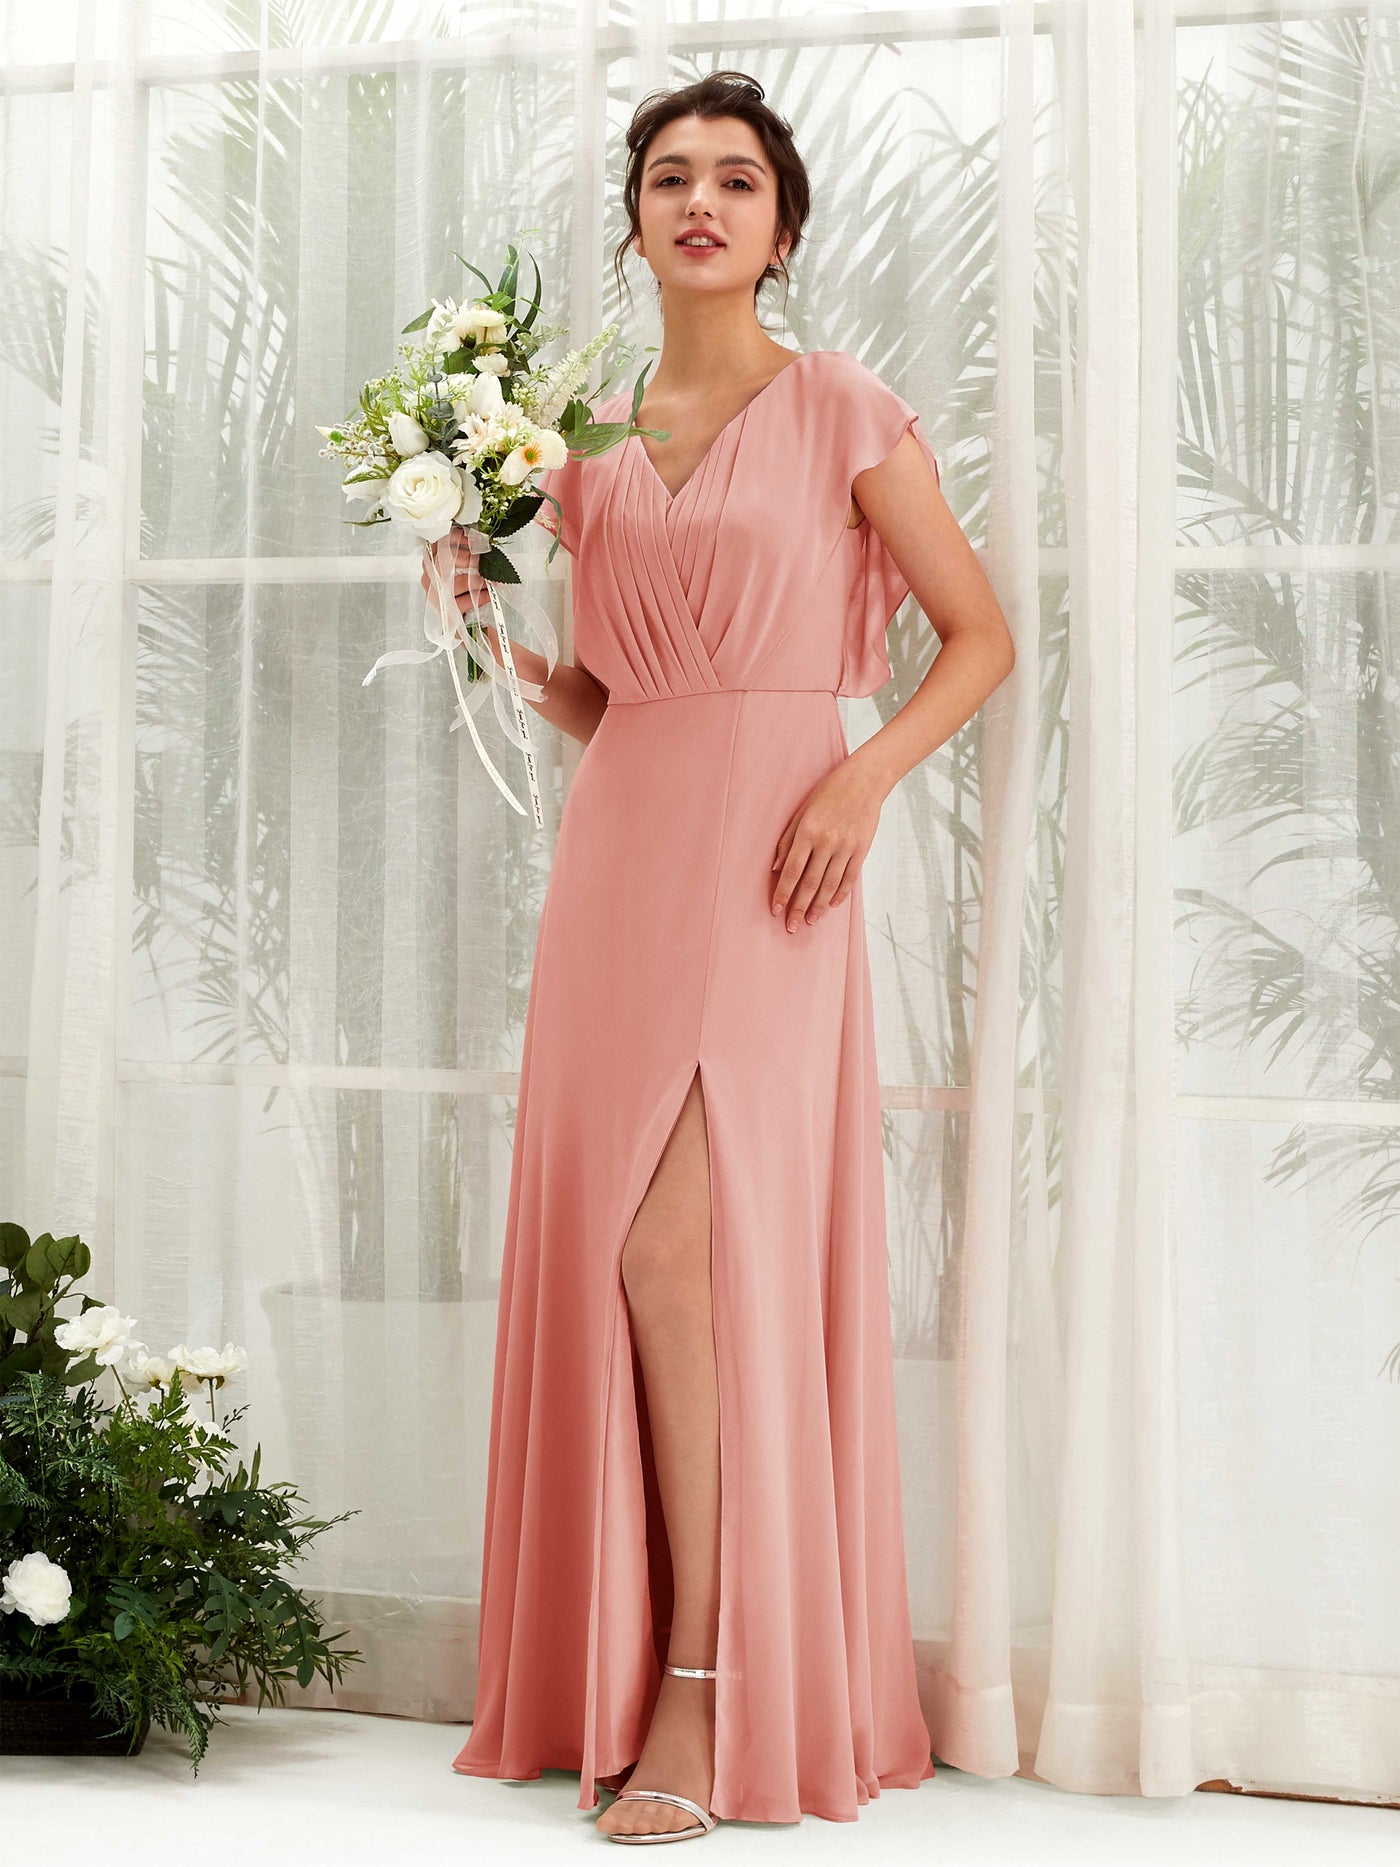 Champagne Rose Bridesmaid Dresses Bridesmaid Dress A-line Chiffon V-neck Full Length Short Sleeves Wedding Party Dress (81225606)#color_champagne-rose